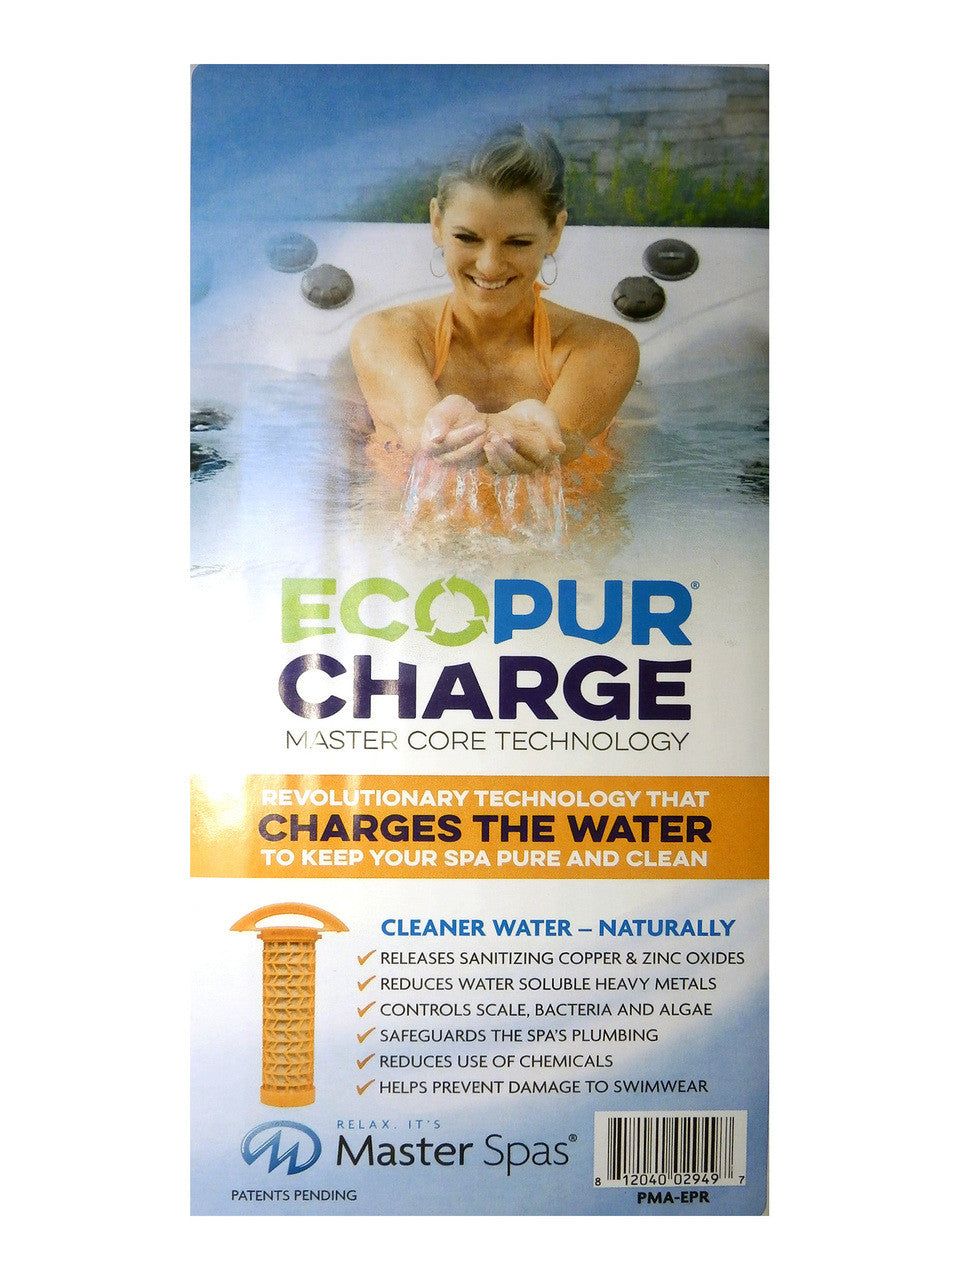 H2X Trainer/Challenger & Michael Phelps Swim Spa Eco Pur Charge Filter Set(4 piece)